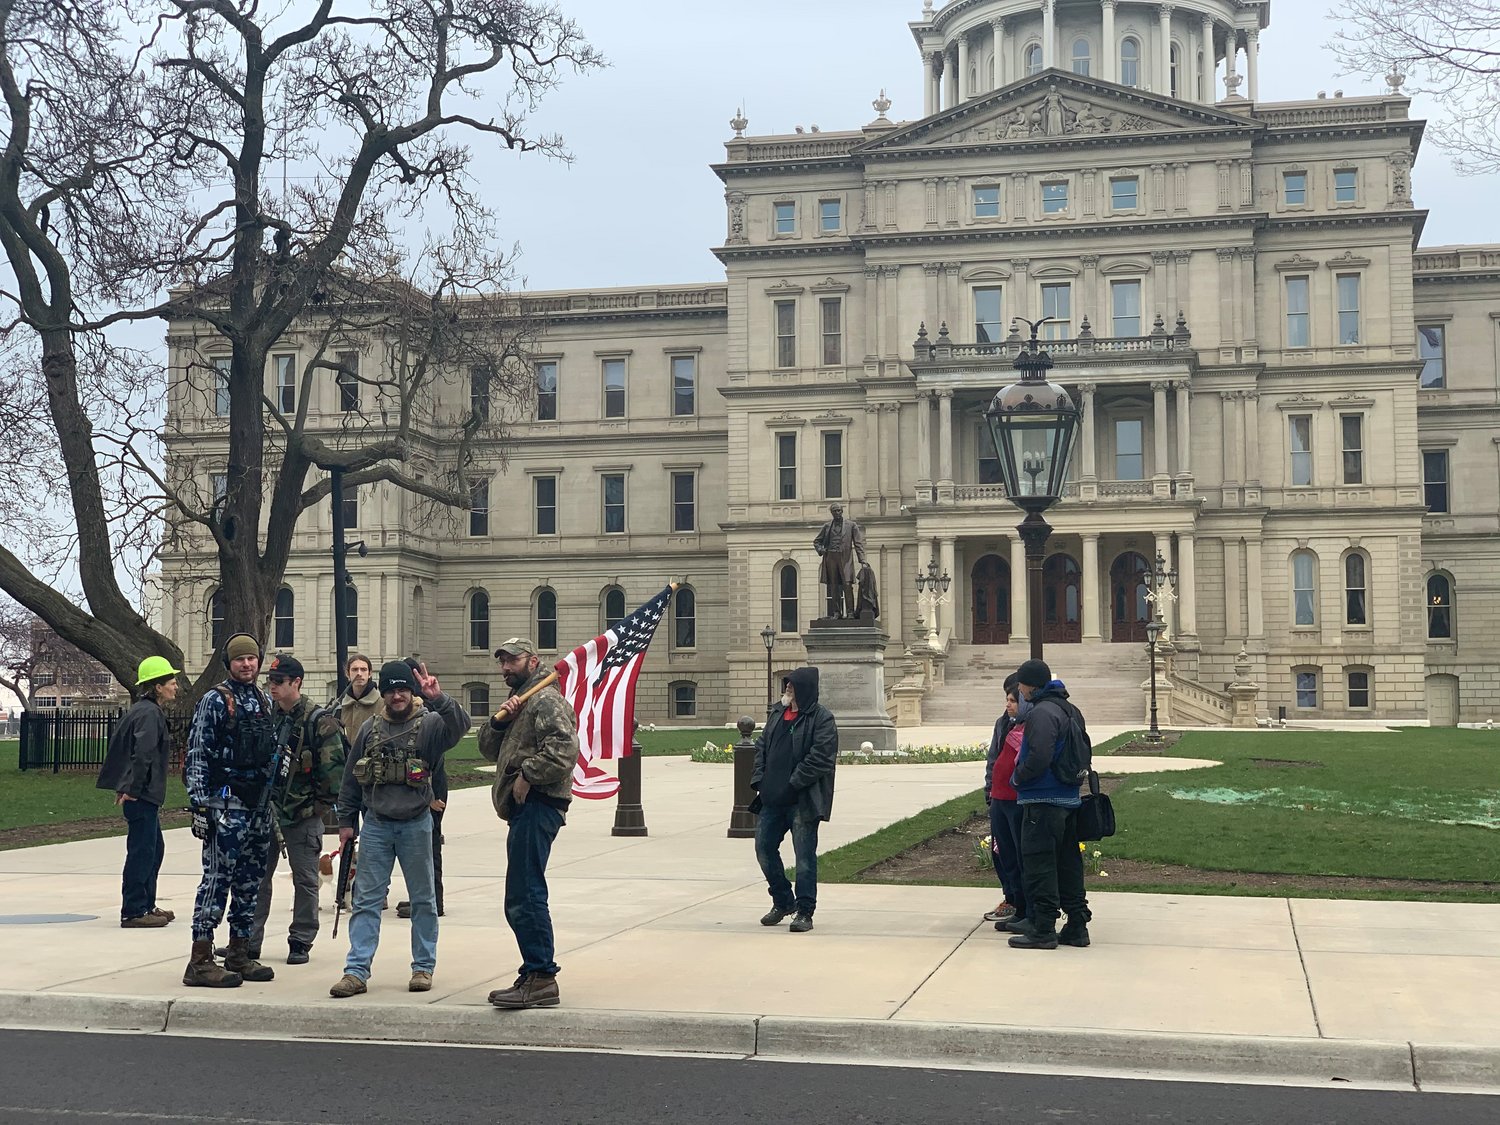 A small group of demonstrators gathered at the Michigan State Capitol today.